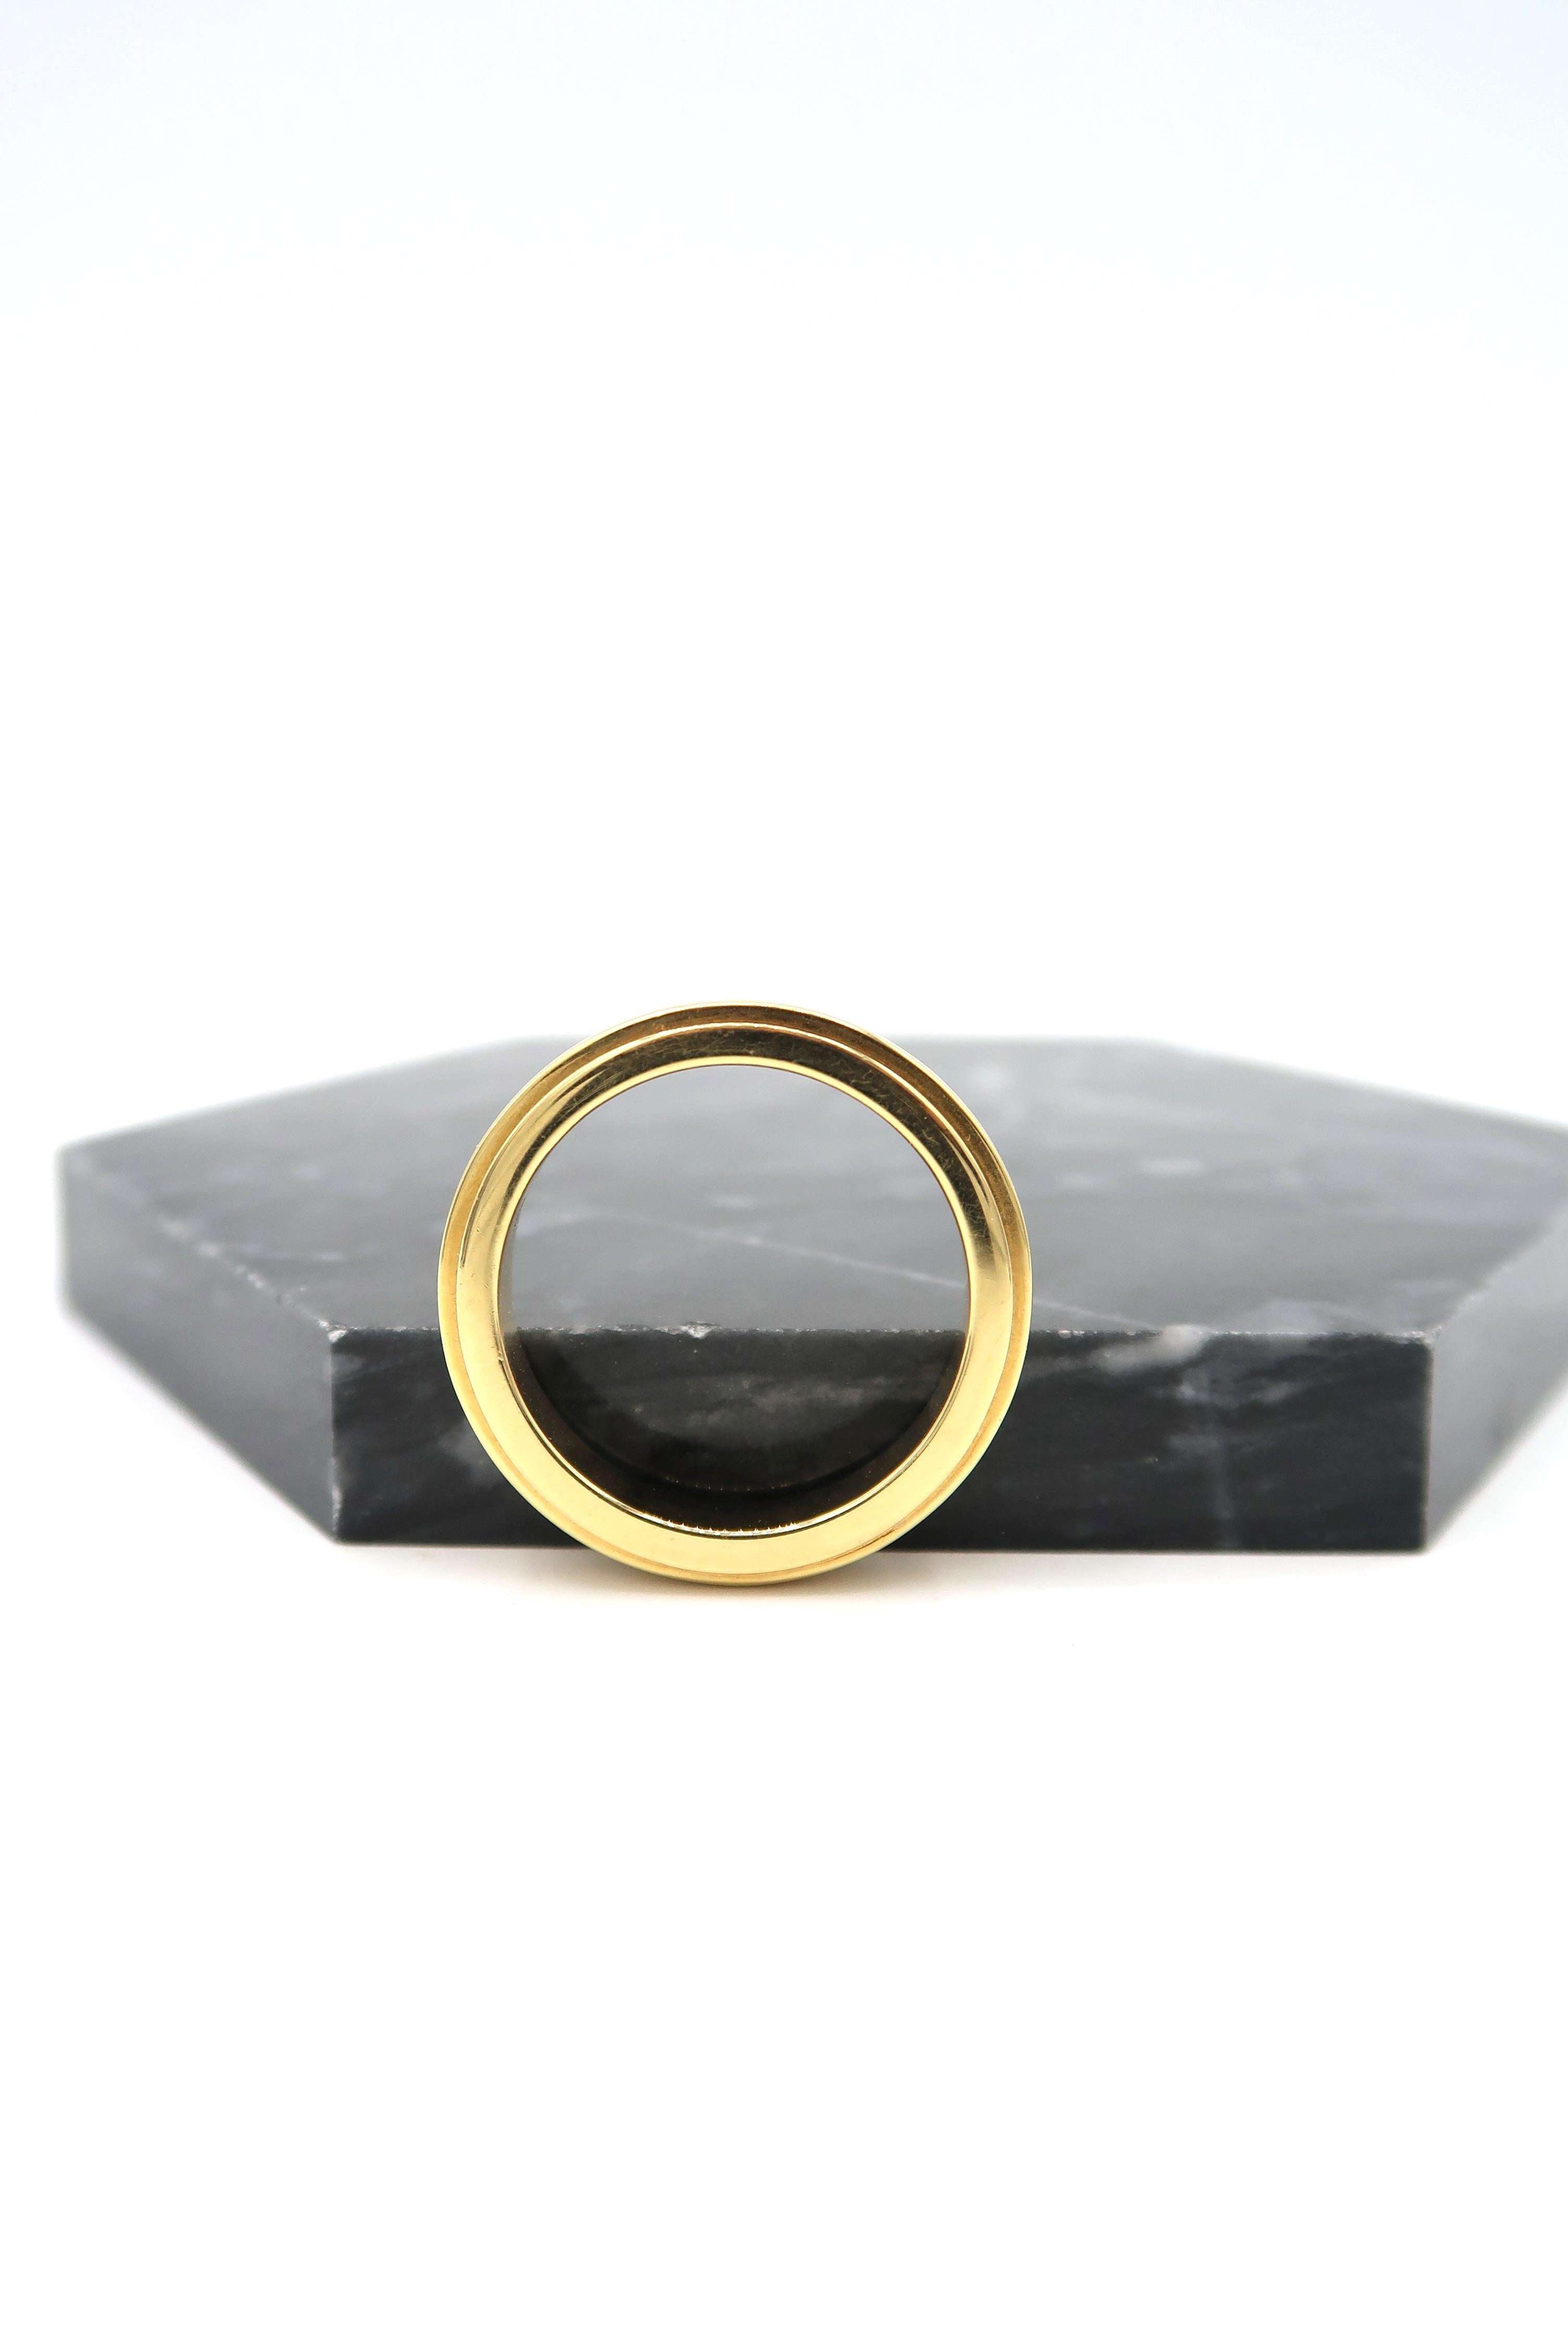 Mens 18 Karat Yellow Gold Step Edge Turnable Band Ring

Also available in other sizes and other texture (Sateen, Matte, Brushed, etc.)

Ring size: US 11, UK V, 65
Gold: 18K 13.073g.

